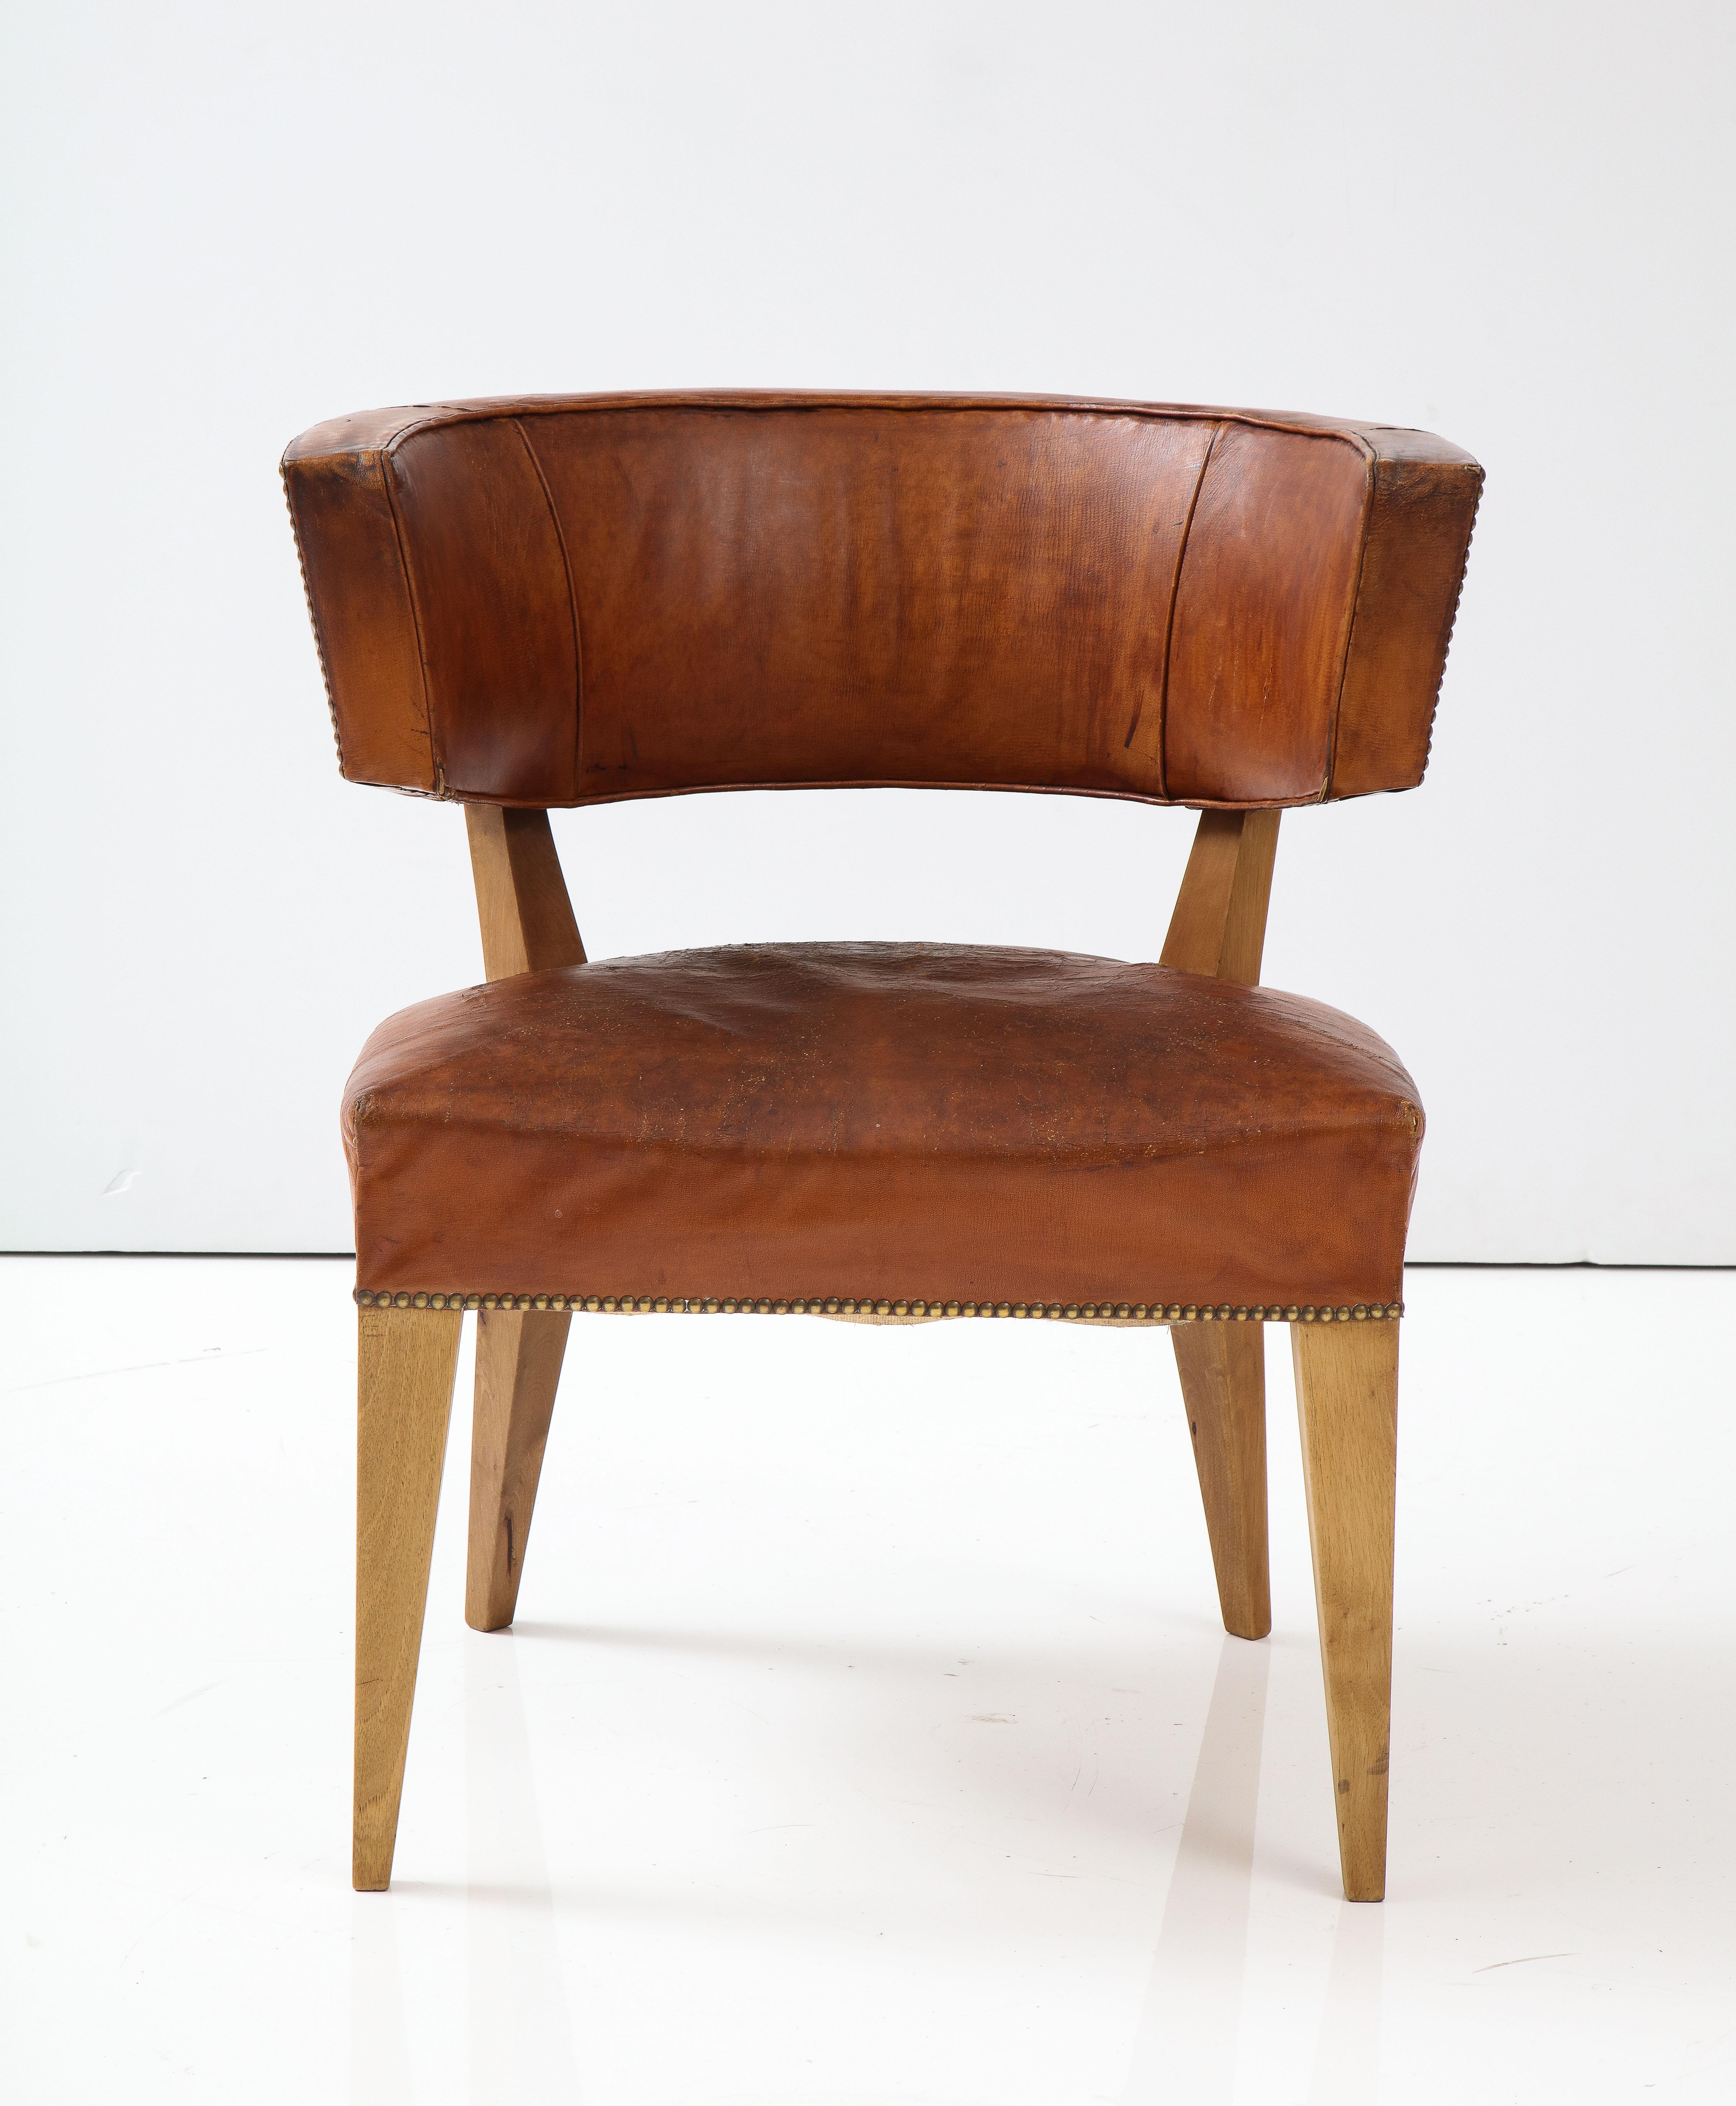 Simple Art Deco Klismos chair with a beautifully patinated leather, great condition.